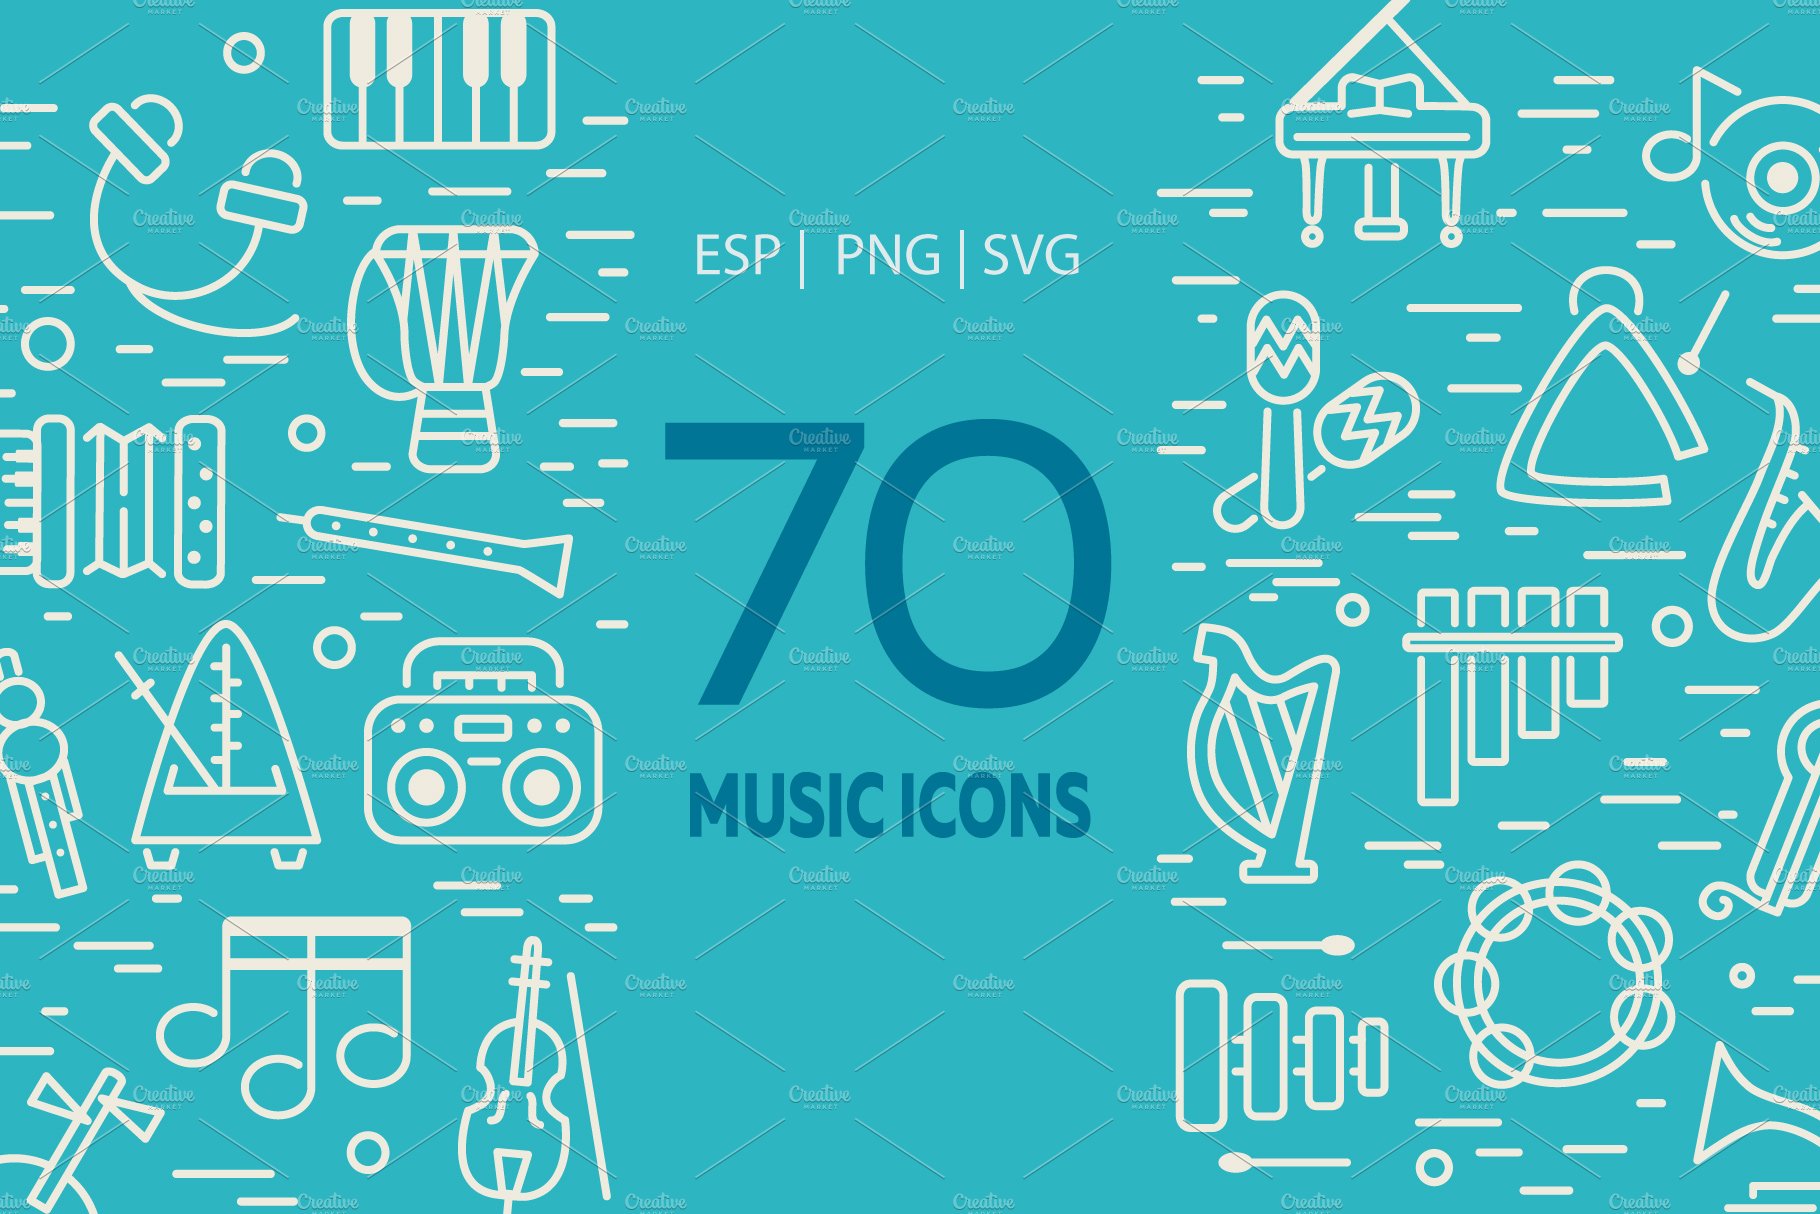 70 Music Icons cover image.